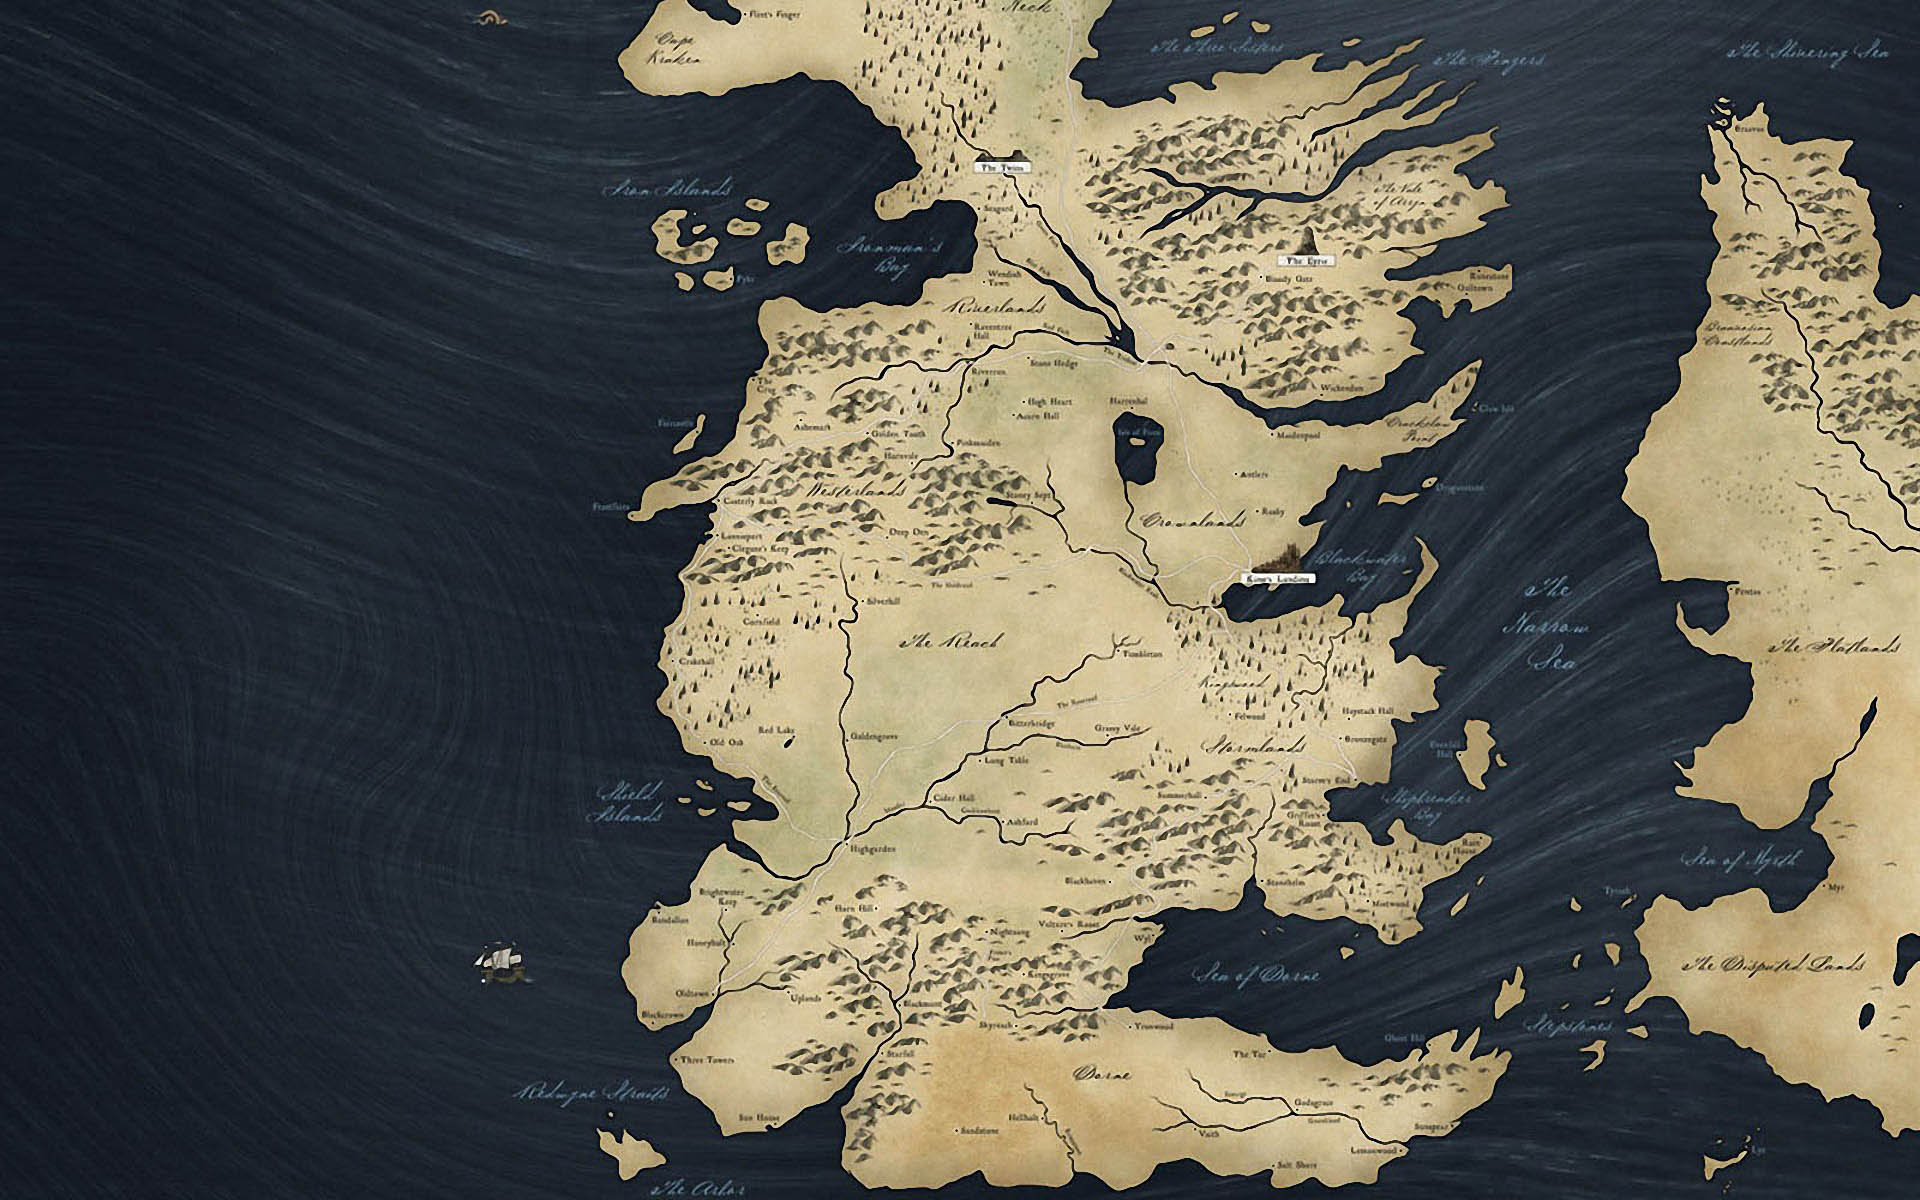 Game Of Thrones Map Wallpaper On